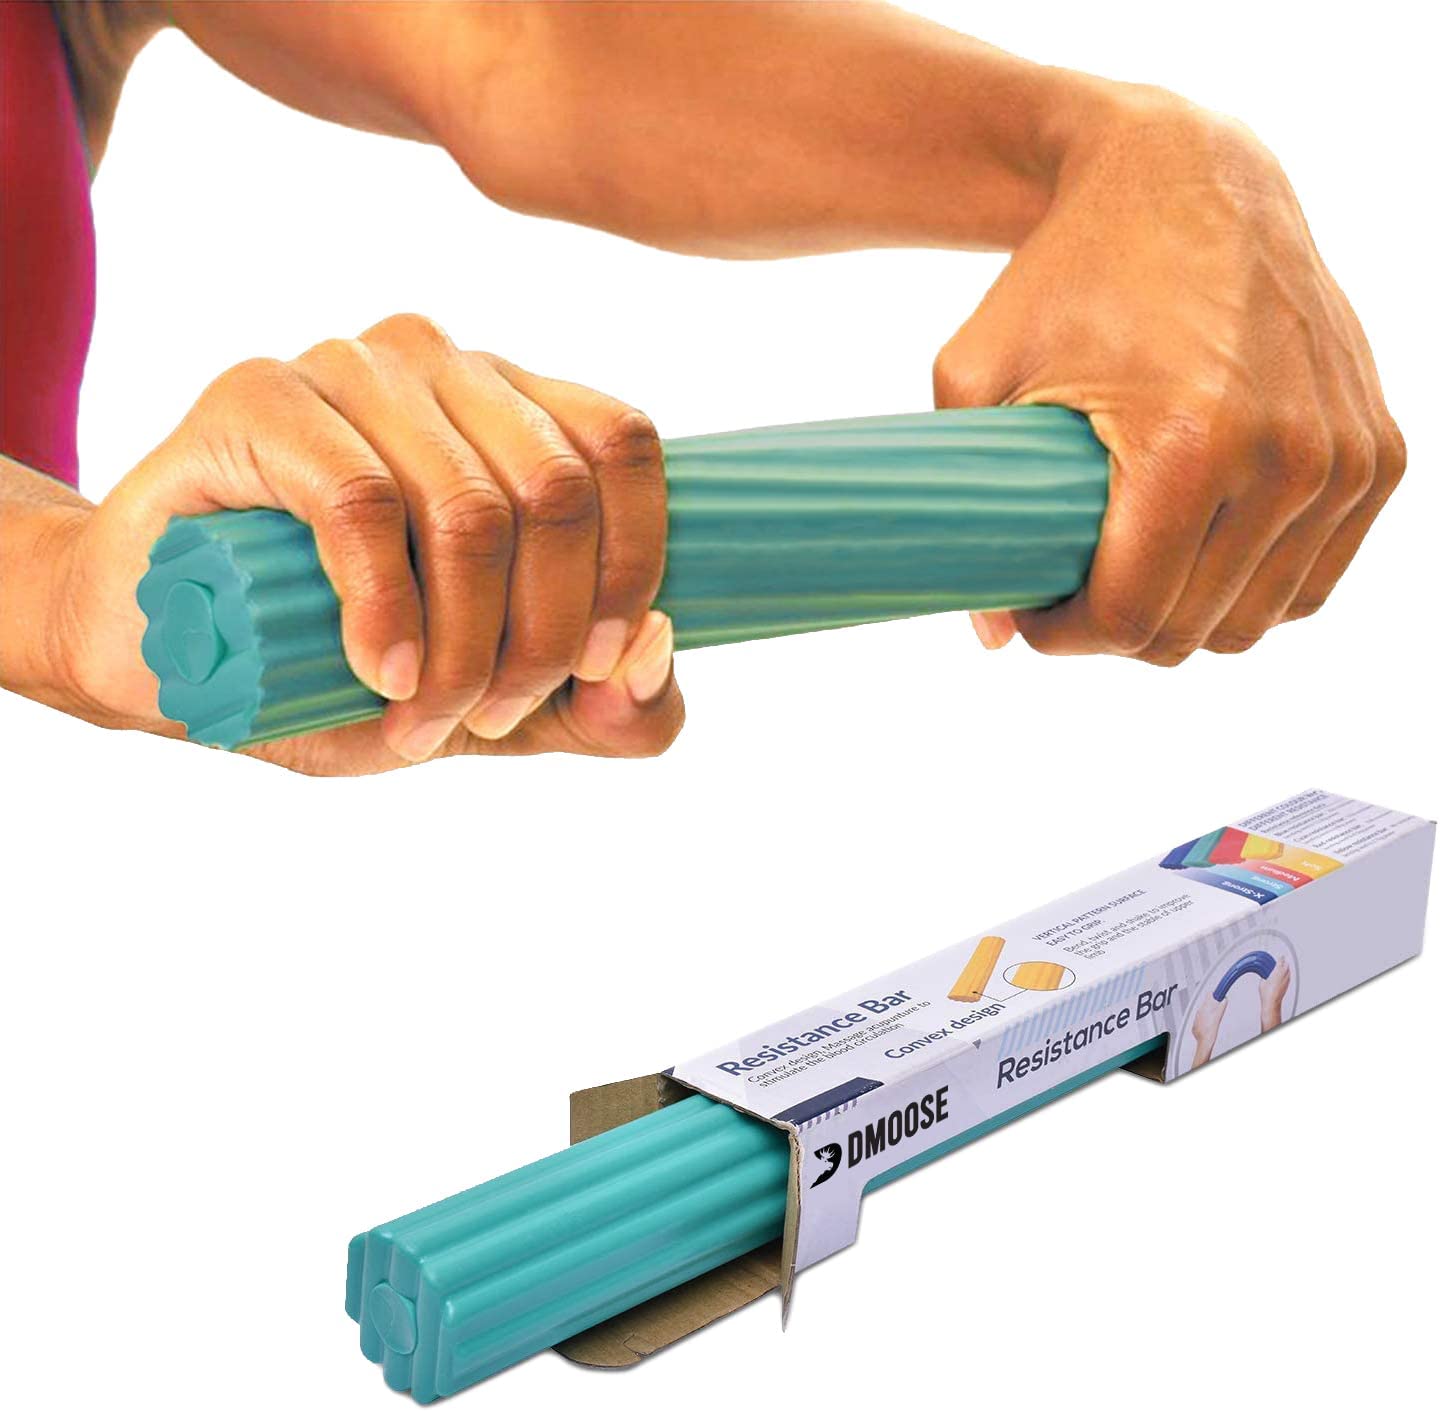 DMOOSE Hypoallergenic Flexible Resistance Bar Occupational & Physical Therapy Aids